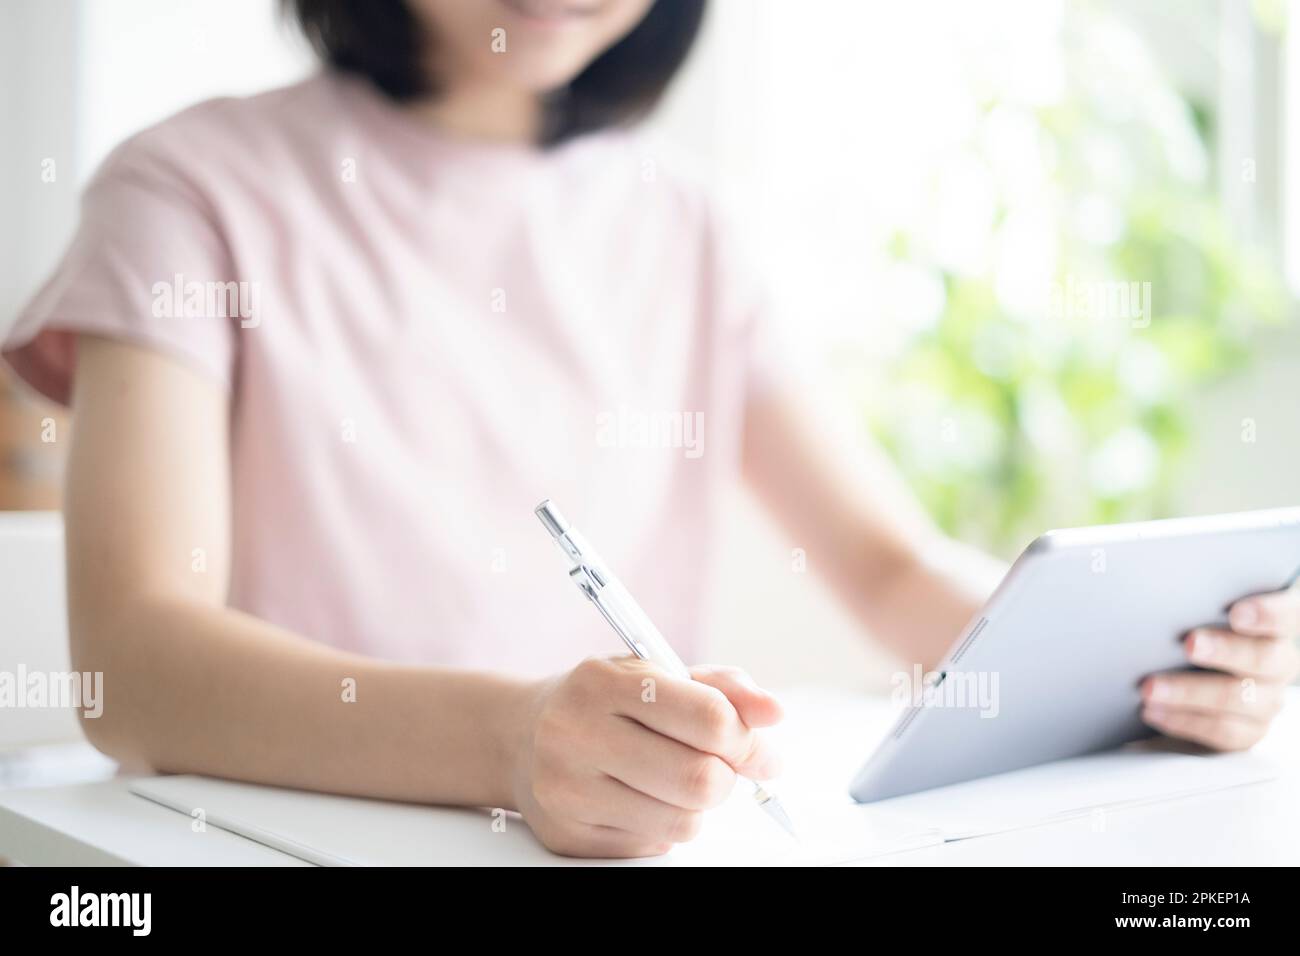 High school student studying at home Stock Photo